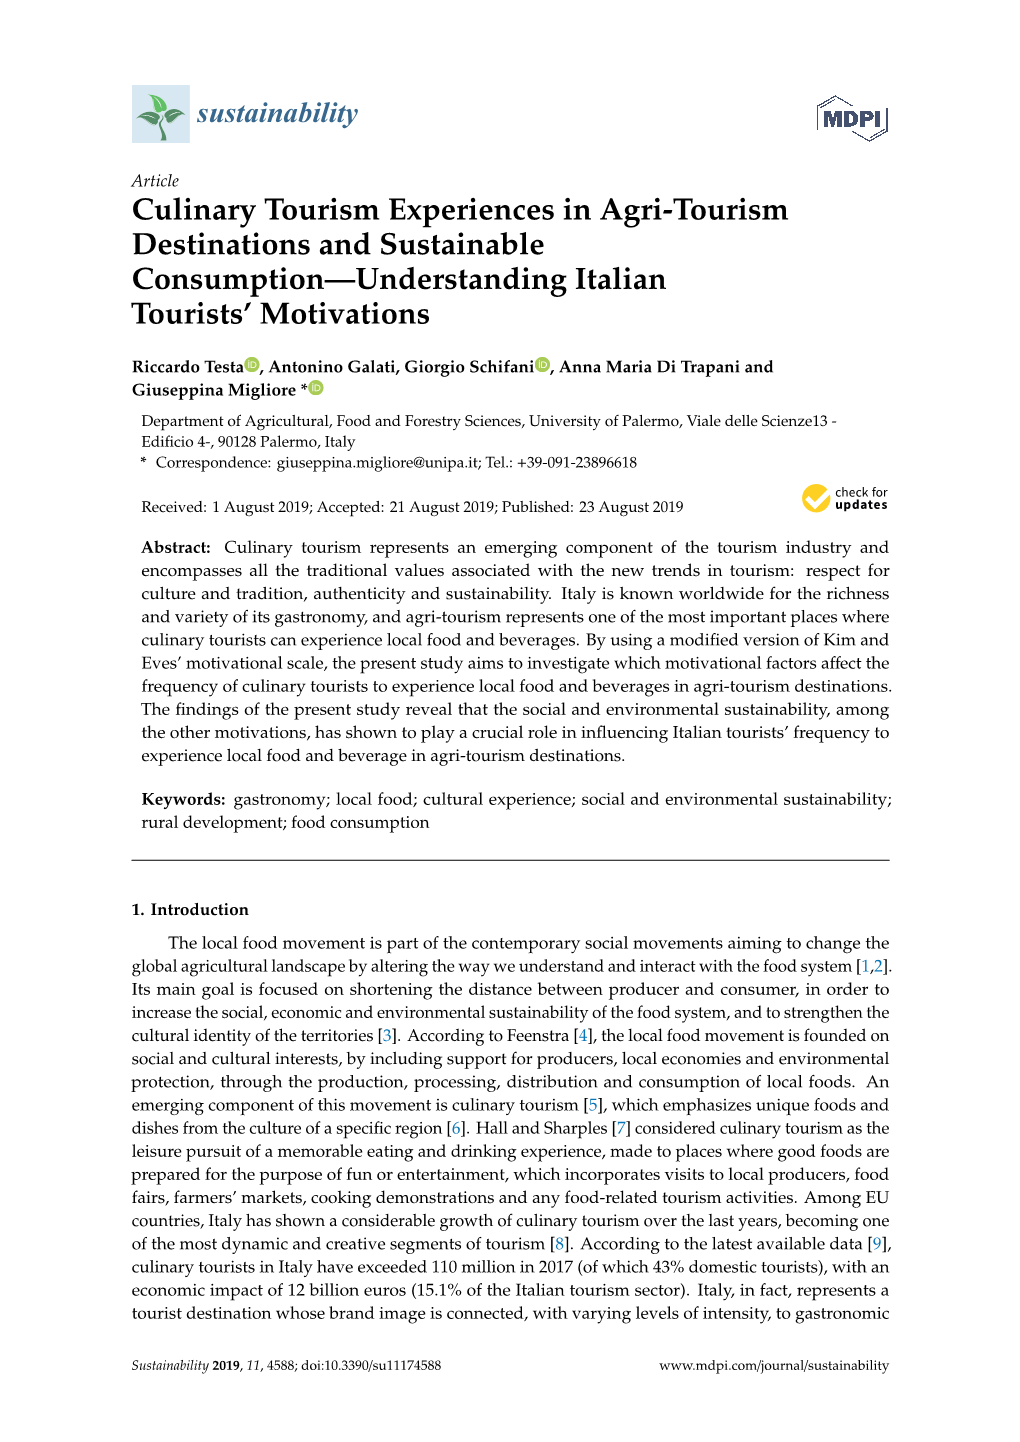 Culinary Tourism Experiences in Agri-Tourism Destinations and Sustainable Consumption—Understanding Italian Tourists’ Motivations